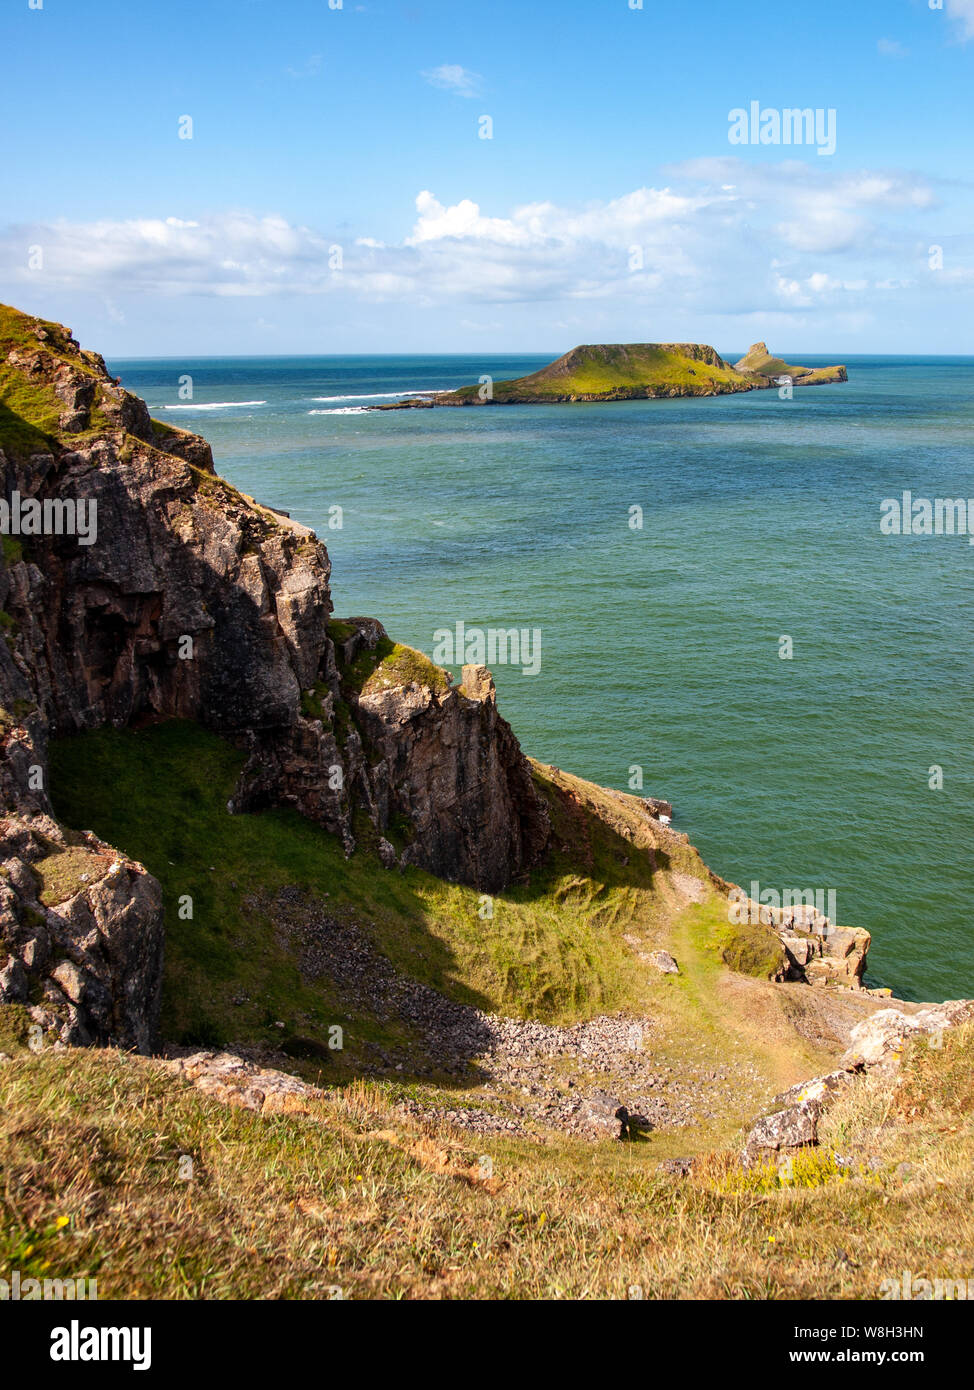 Worms Head as seen from the clifftops at Rhossili. AONB, Gower, Wales, UK. Stock Photo